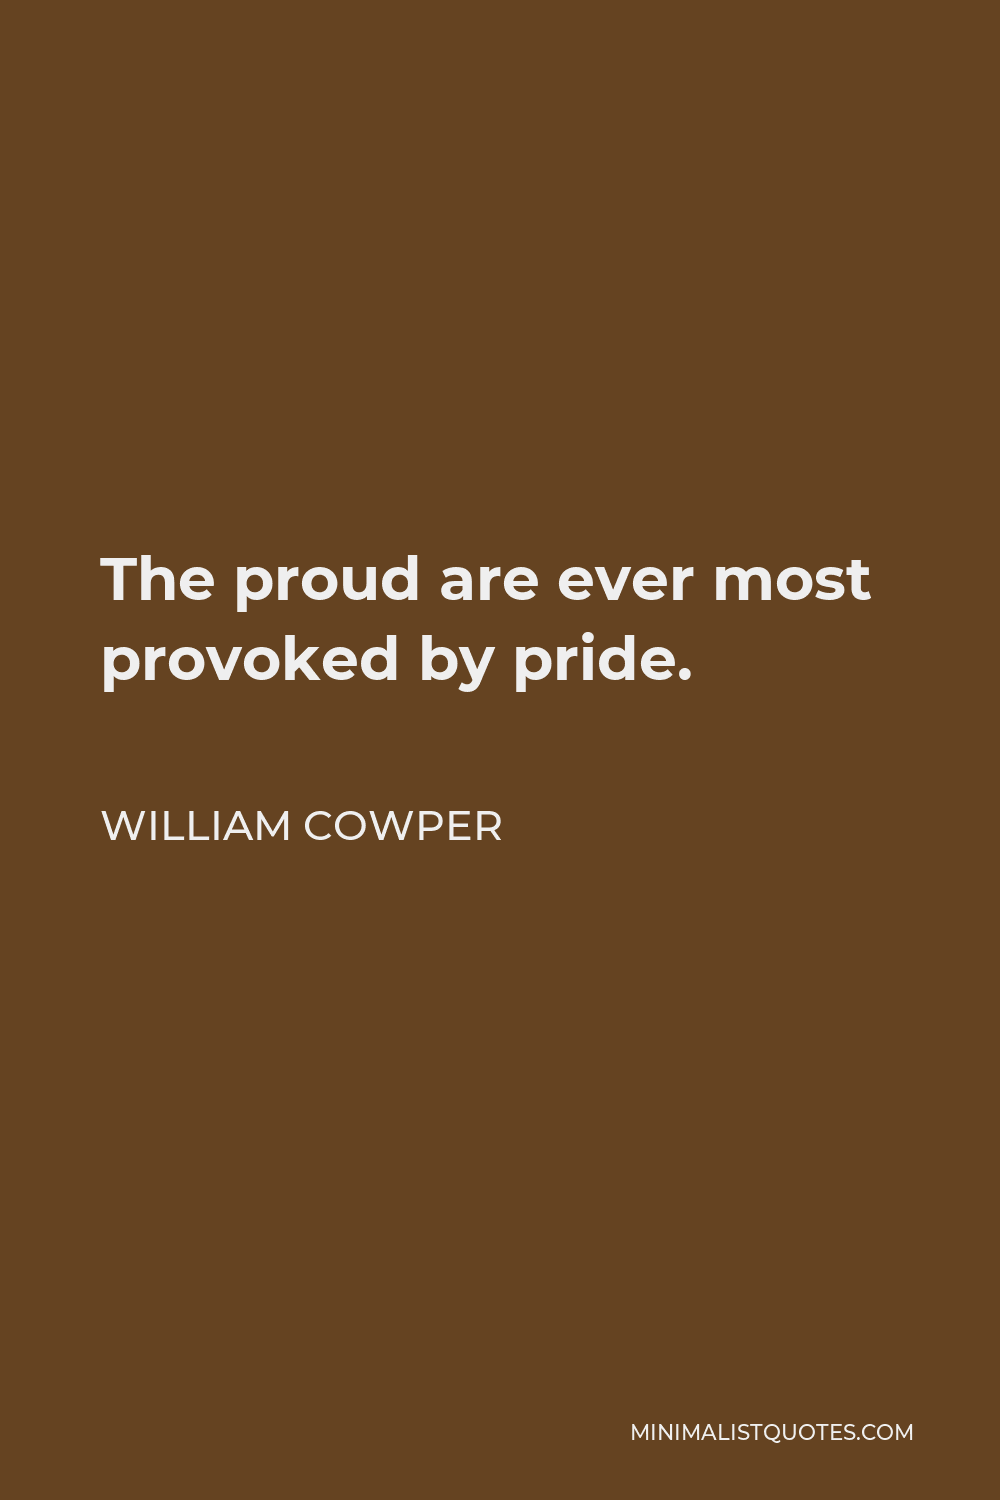 William Cowper Quote - The proud are ever most provoked by pride.